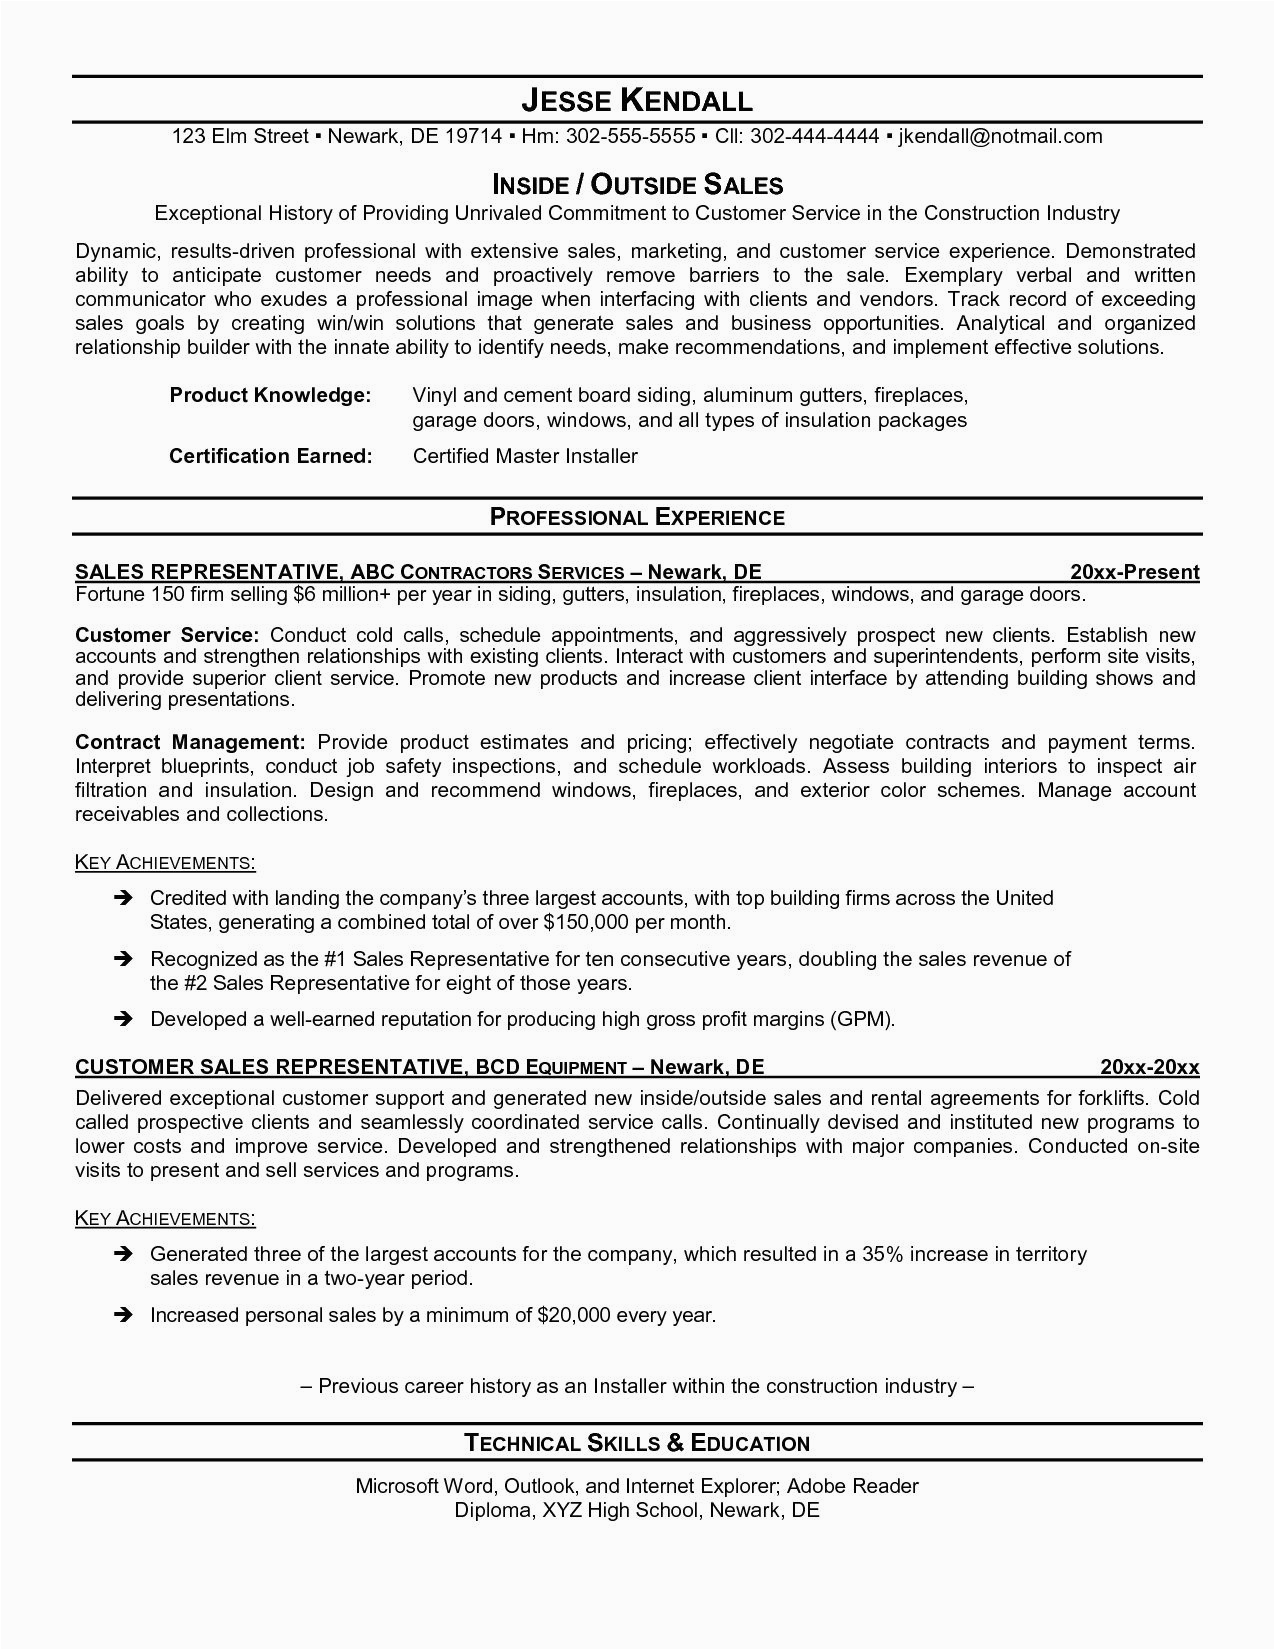 Sample Resume Objectives for Sales Representative 23 Sales Resume Objective Examples In 2020 with Images